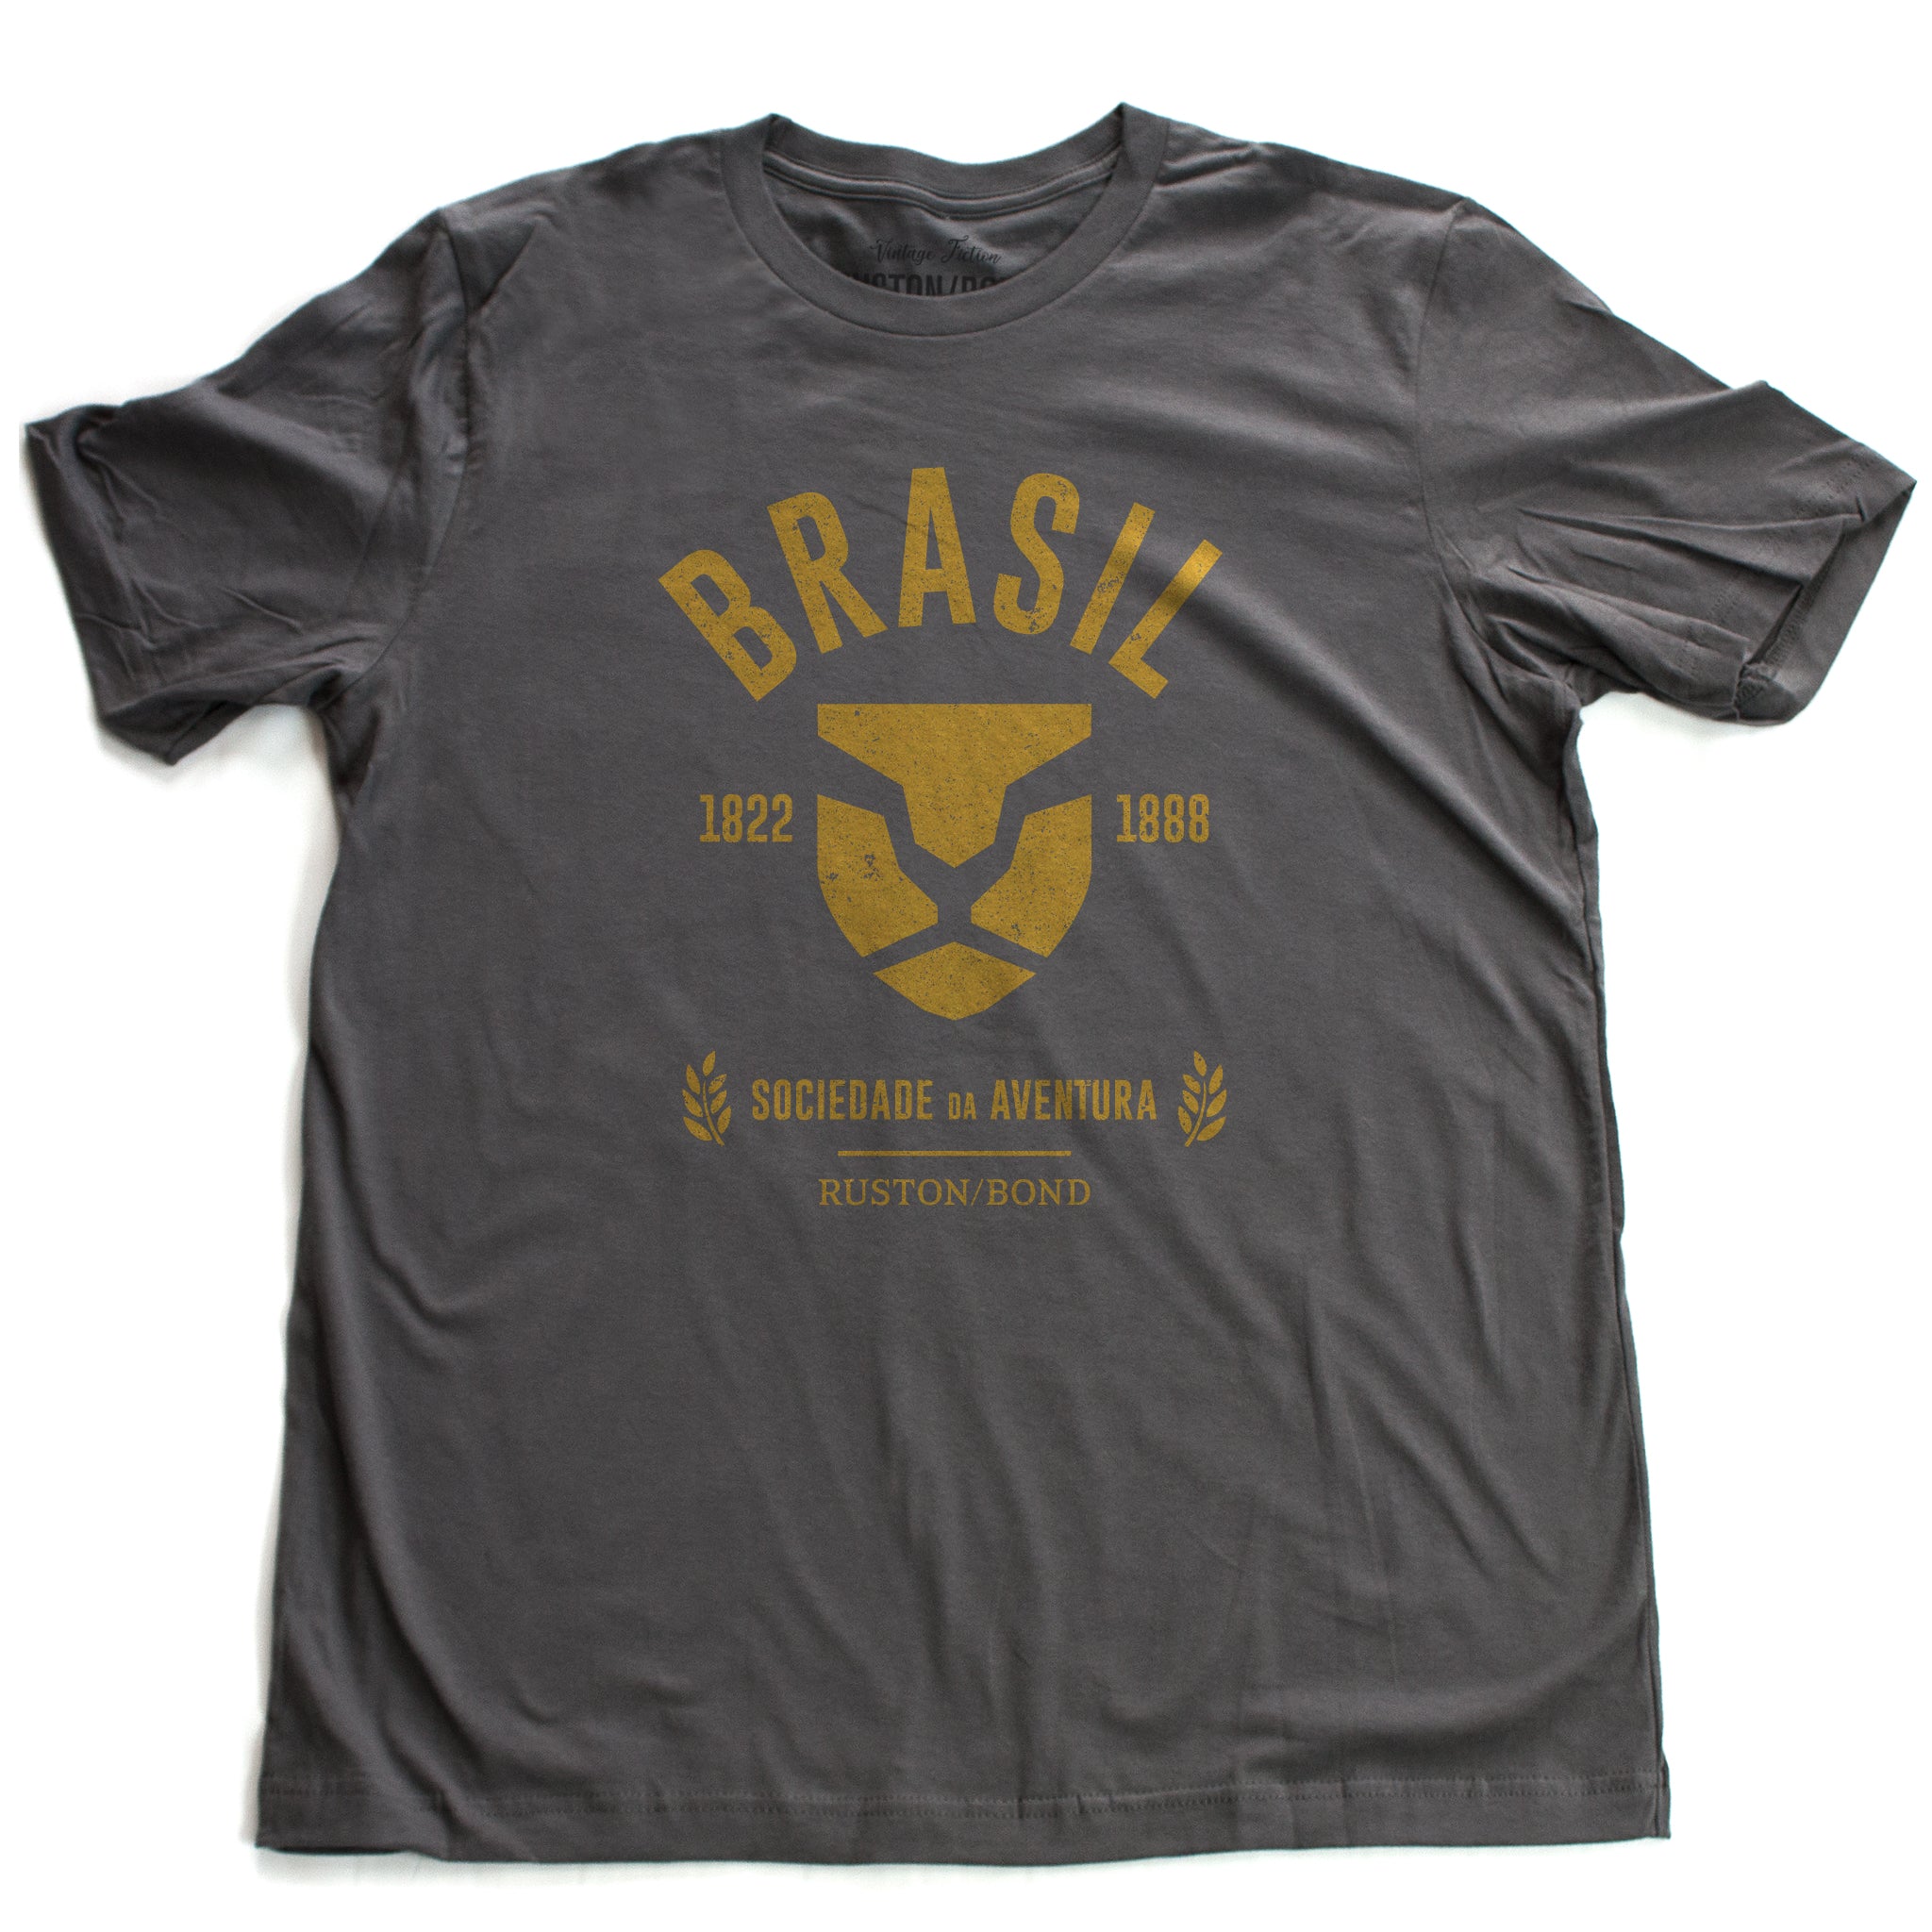 Asphalt gray fashion, retro-inspired t-shirt featuring classic graphic of a strong, minimalist Lion head, for a fictional adventure society in Brazil / Brasil from 1822 to 1888, by the brand Ruston/Bond. From wolfsaint.net